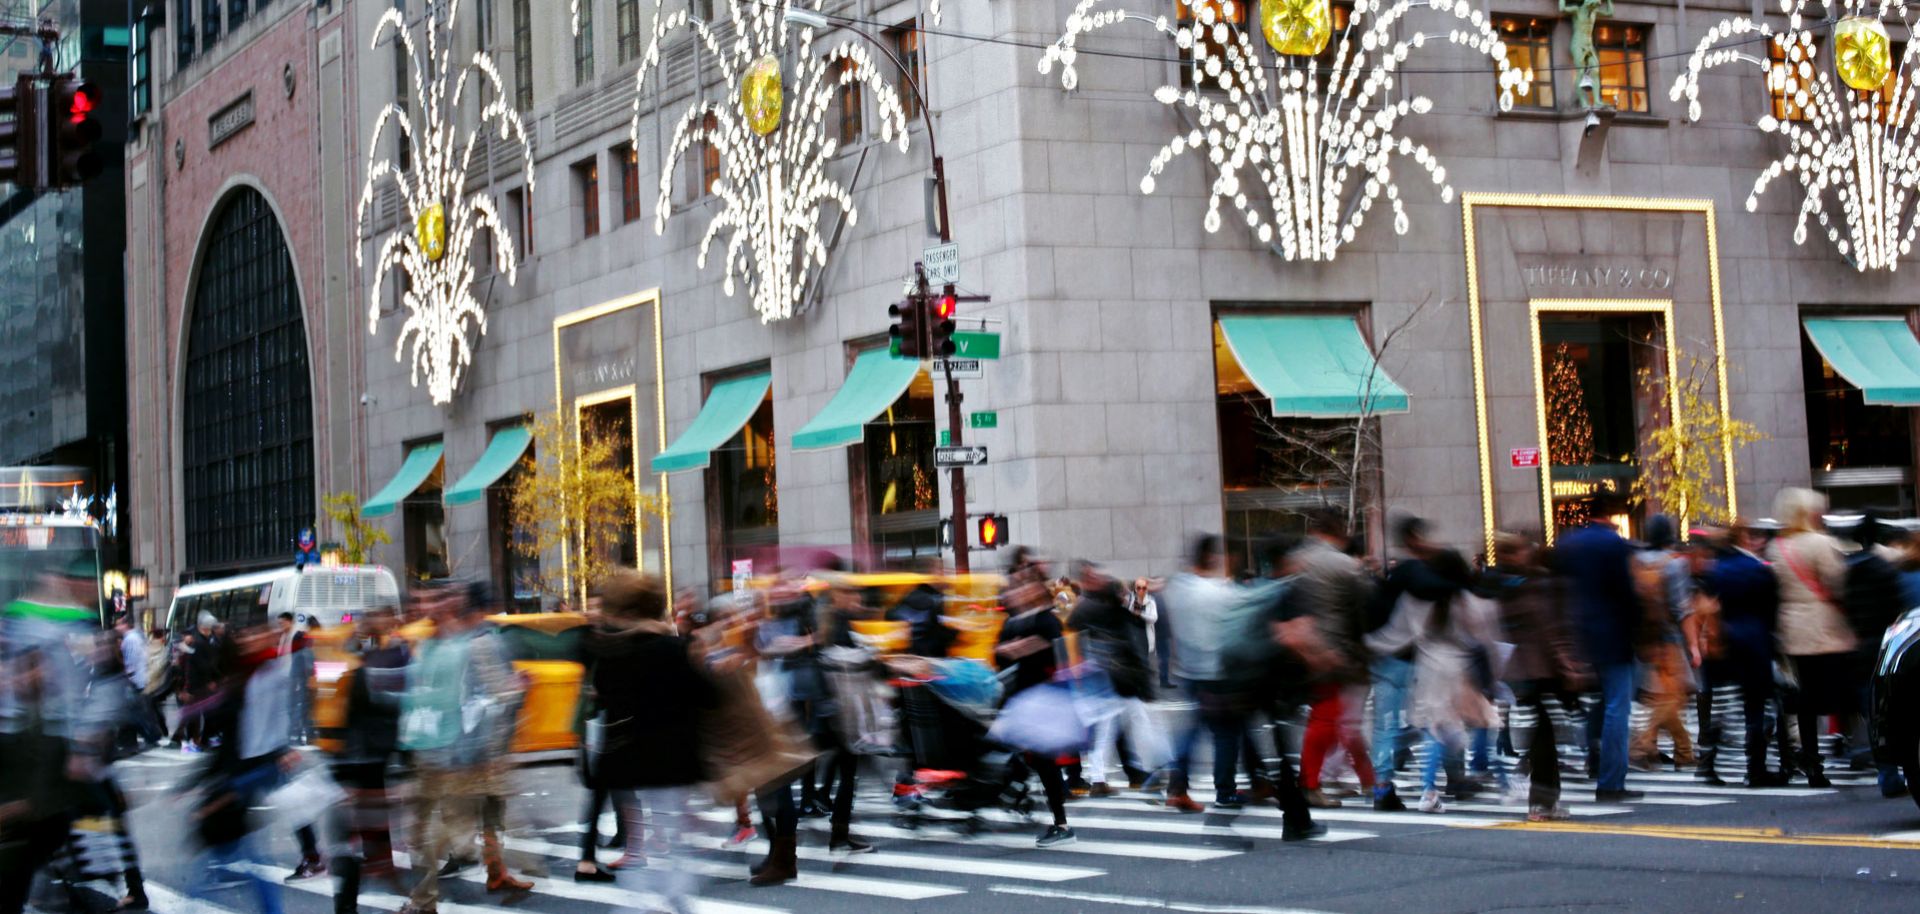 By this time next year, consumers, like these holiday shoppers in New York City, might see the effects of inflation's return. Such signs as stabilizing commodities prices and a bond sell-off point to the return of increasing prices.